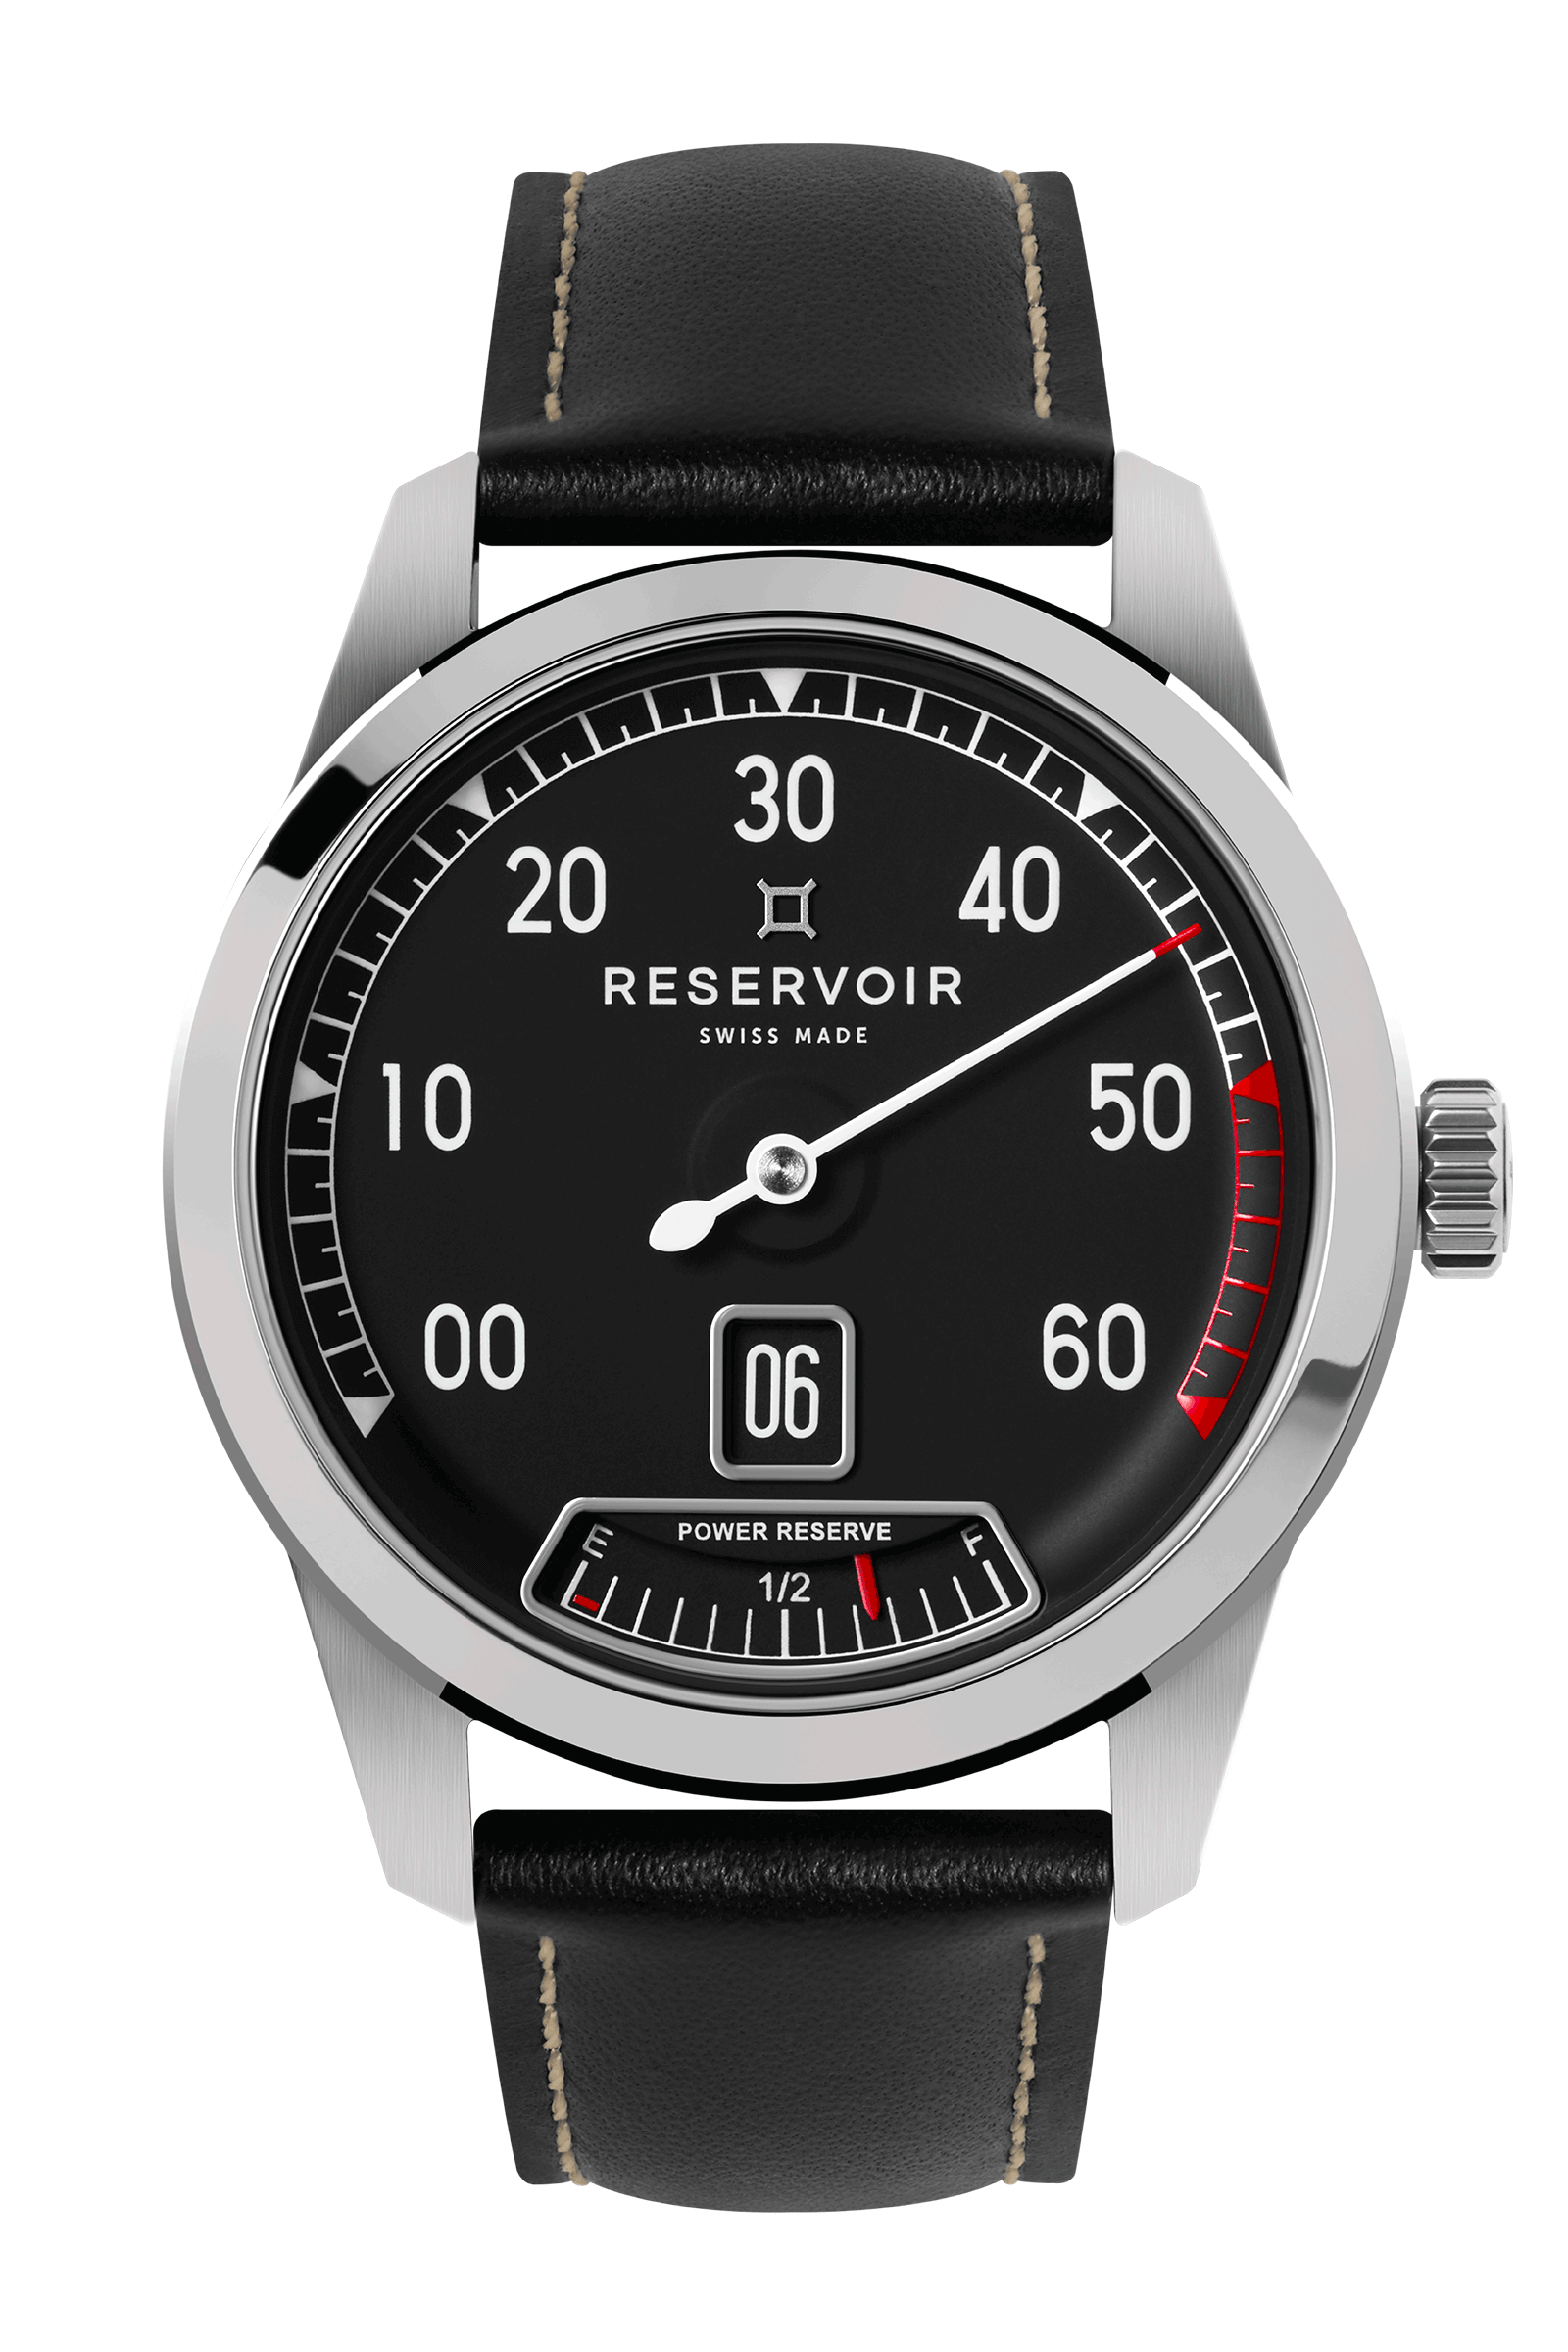 Vintage Car RPM Counter Watch in Luxurious Jet Black, Light Grey, and Dark Grey-Blue